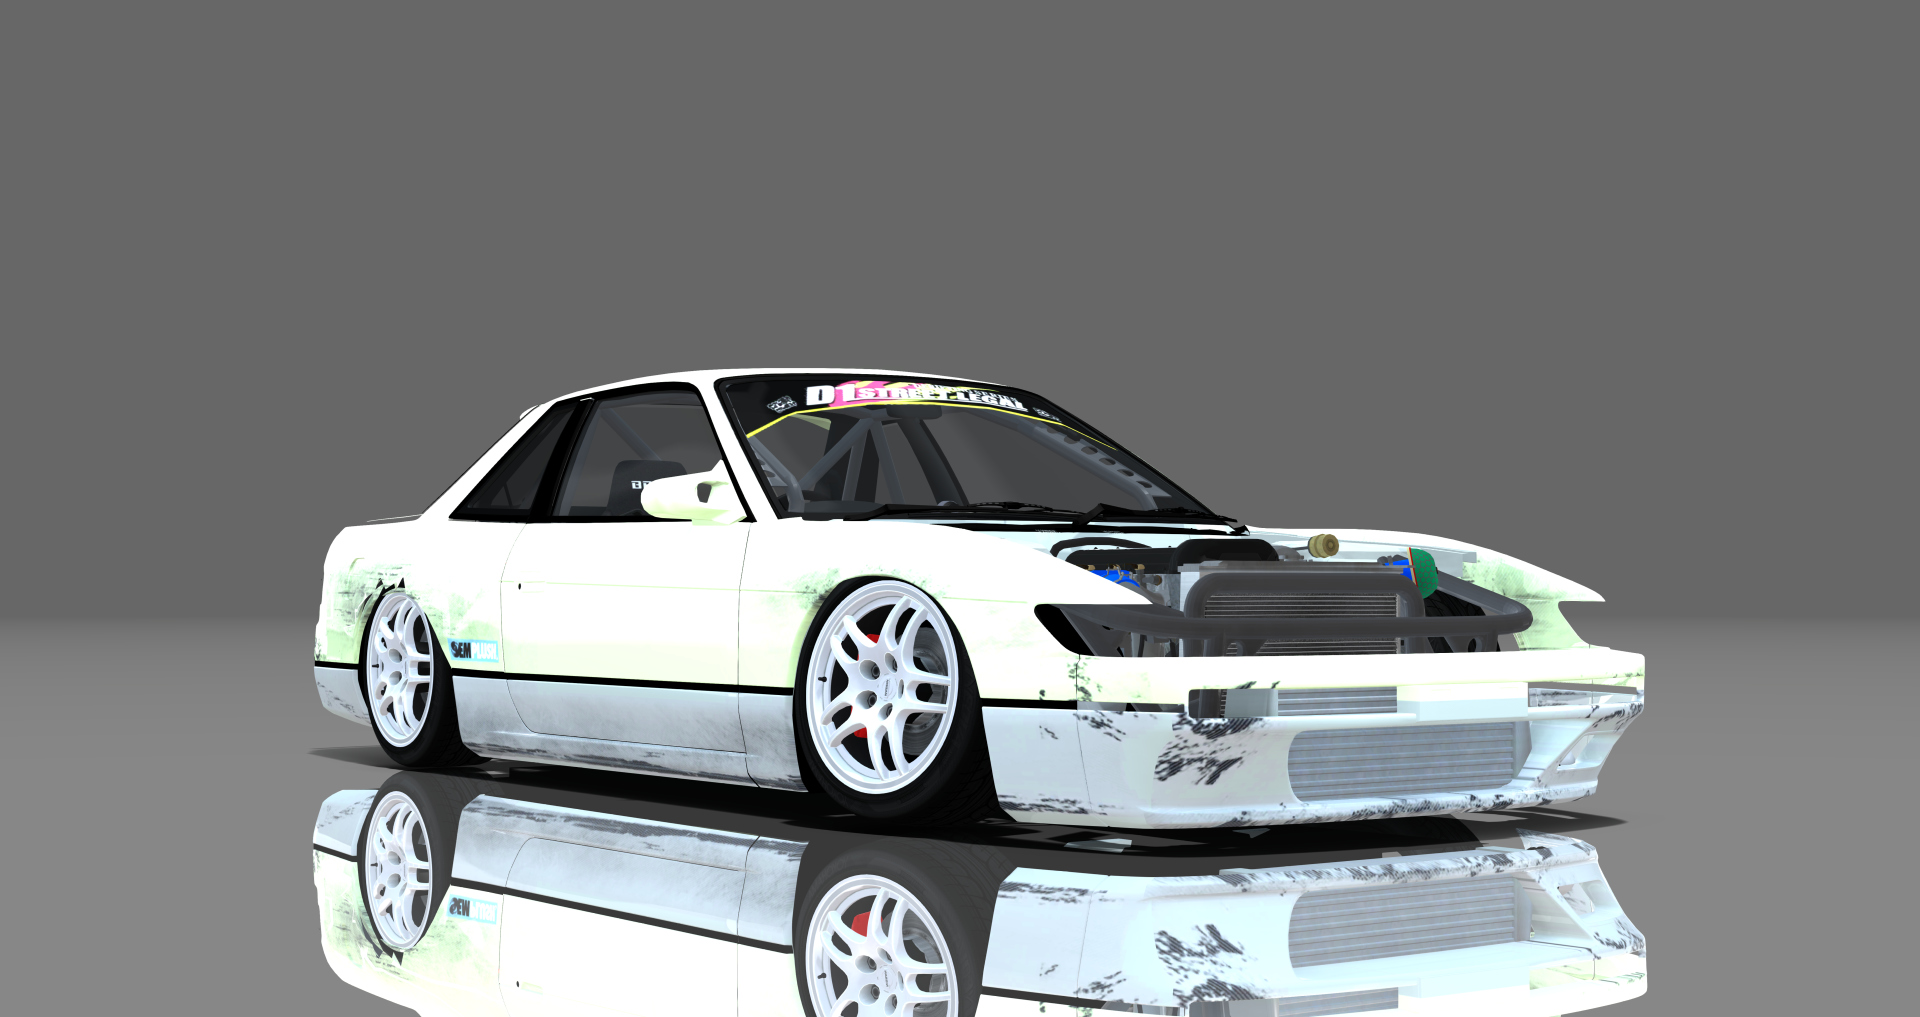 DTP Nissan Silvia S13 Missile, skin twotone_green_grey